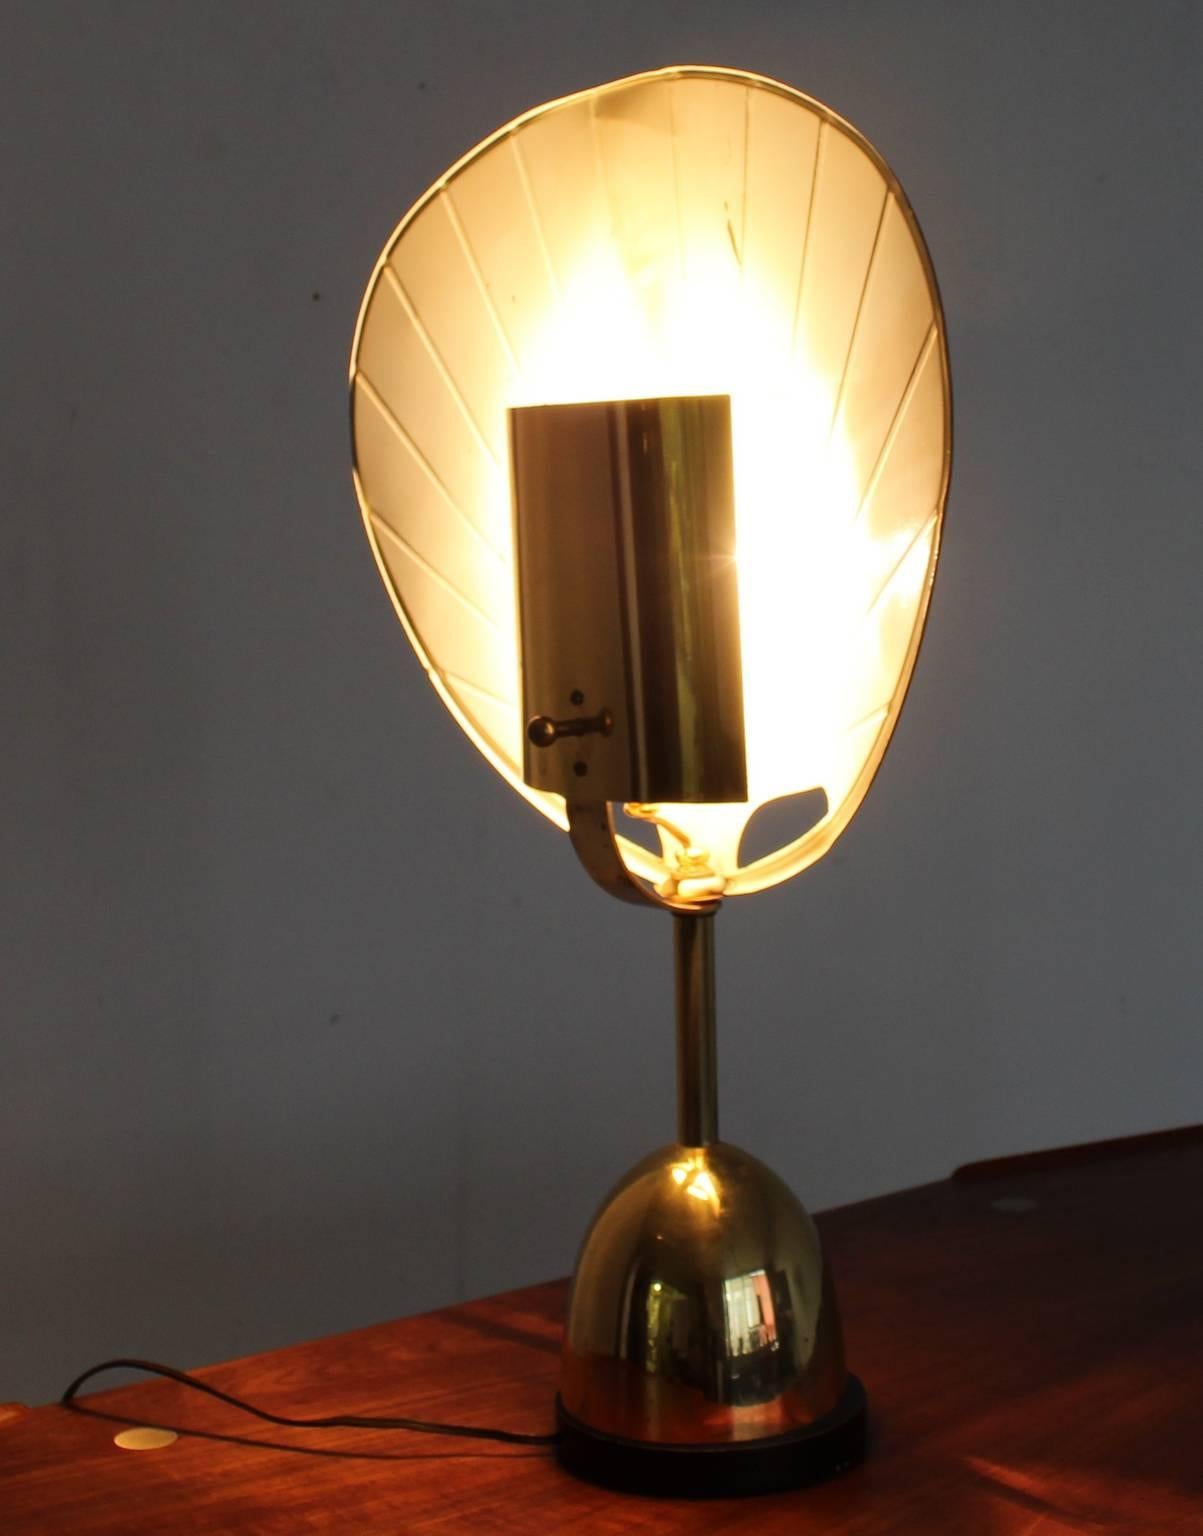 Typical 1970s table lamp.
Manufacturer: Chapman.
Brass and brass colored aluminium.
Inside of the shade is white (with some usermarks see pic).
Nice and elegant dimmer switch.